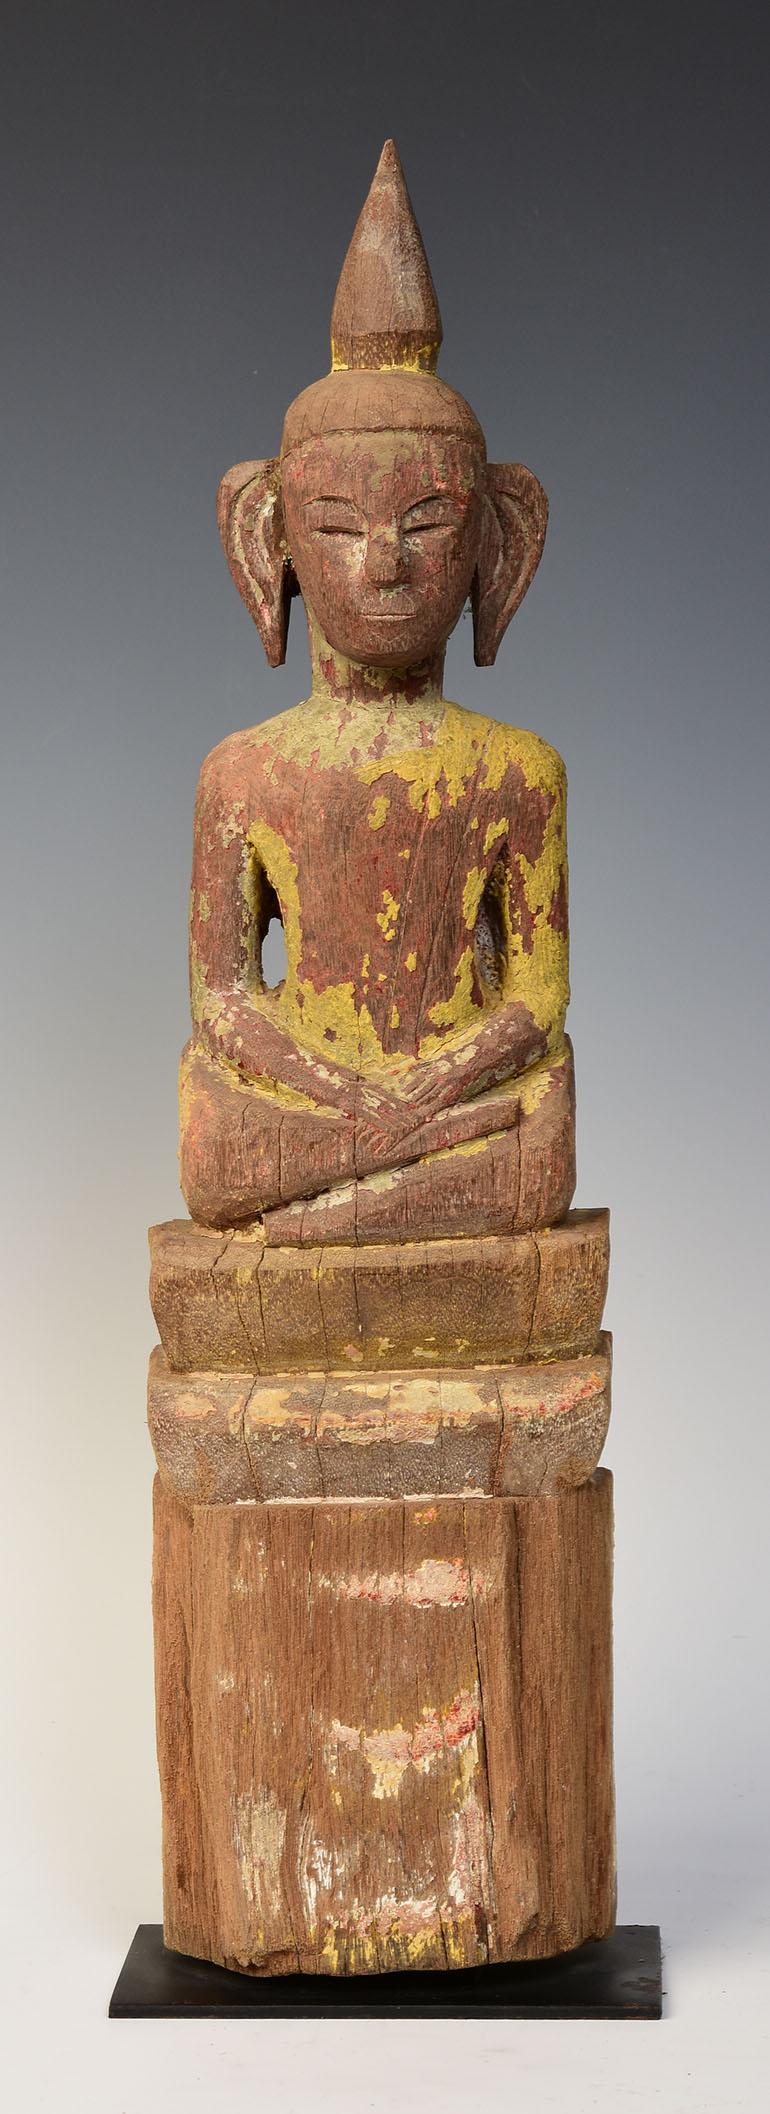 Laos wooden Buddha sitting in Mara Vijaya (calling the earth to witness) posture on a base.

Age: Laos, 19th century
Size: Height 49.6 C.M. / Width 13 C.M.
Size including stand: Height 51.5 C.M.
Condition: Nice condition overall (some expected